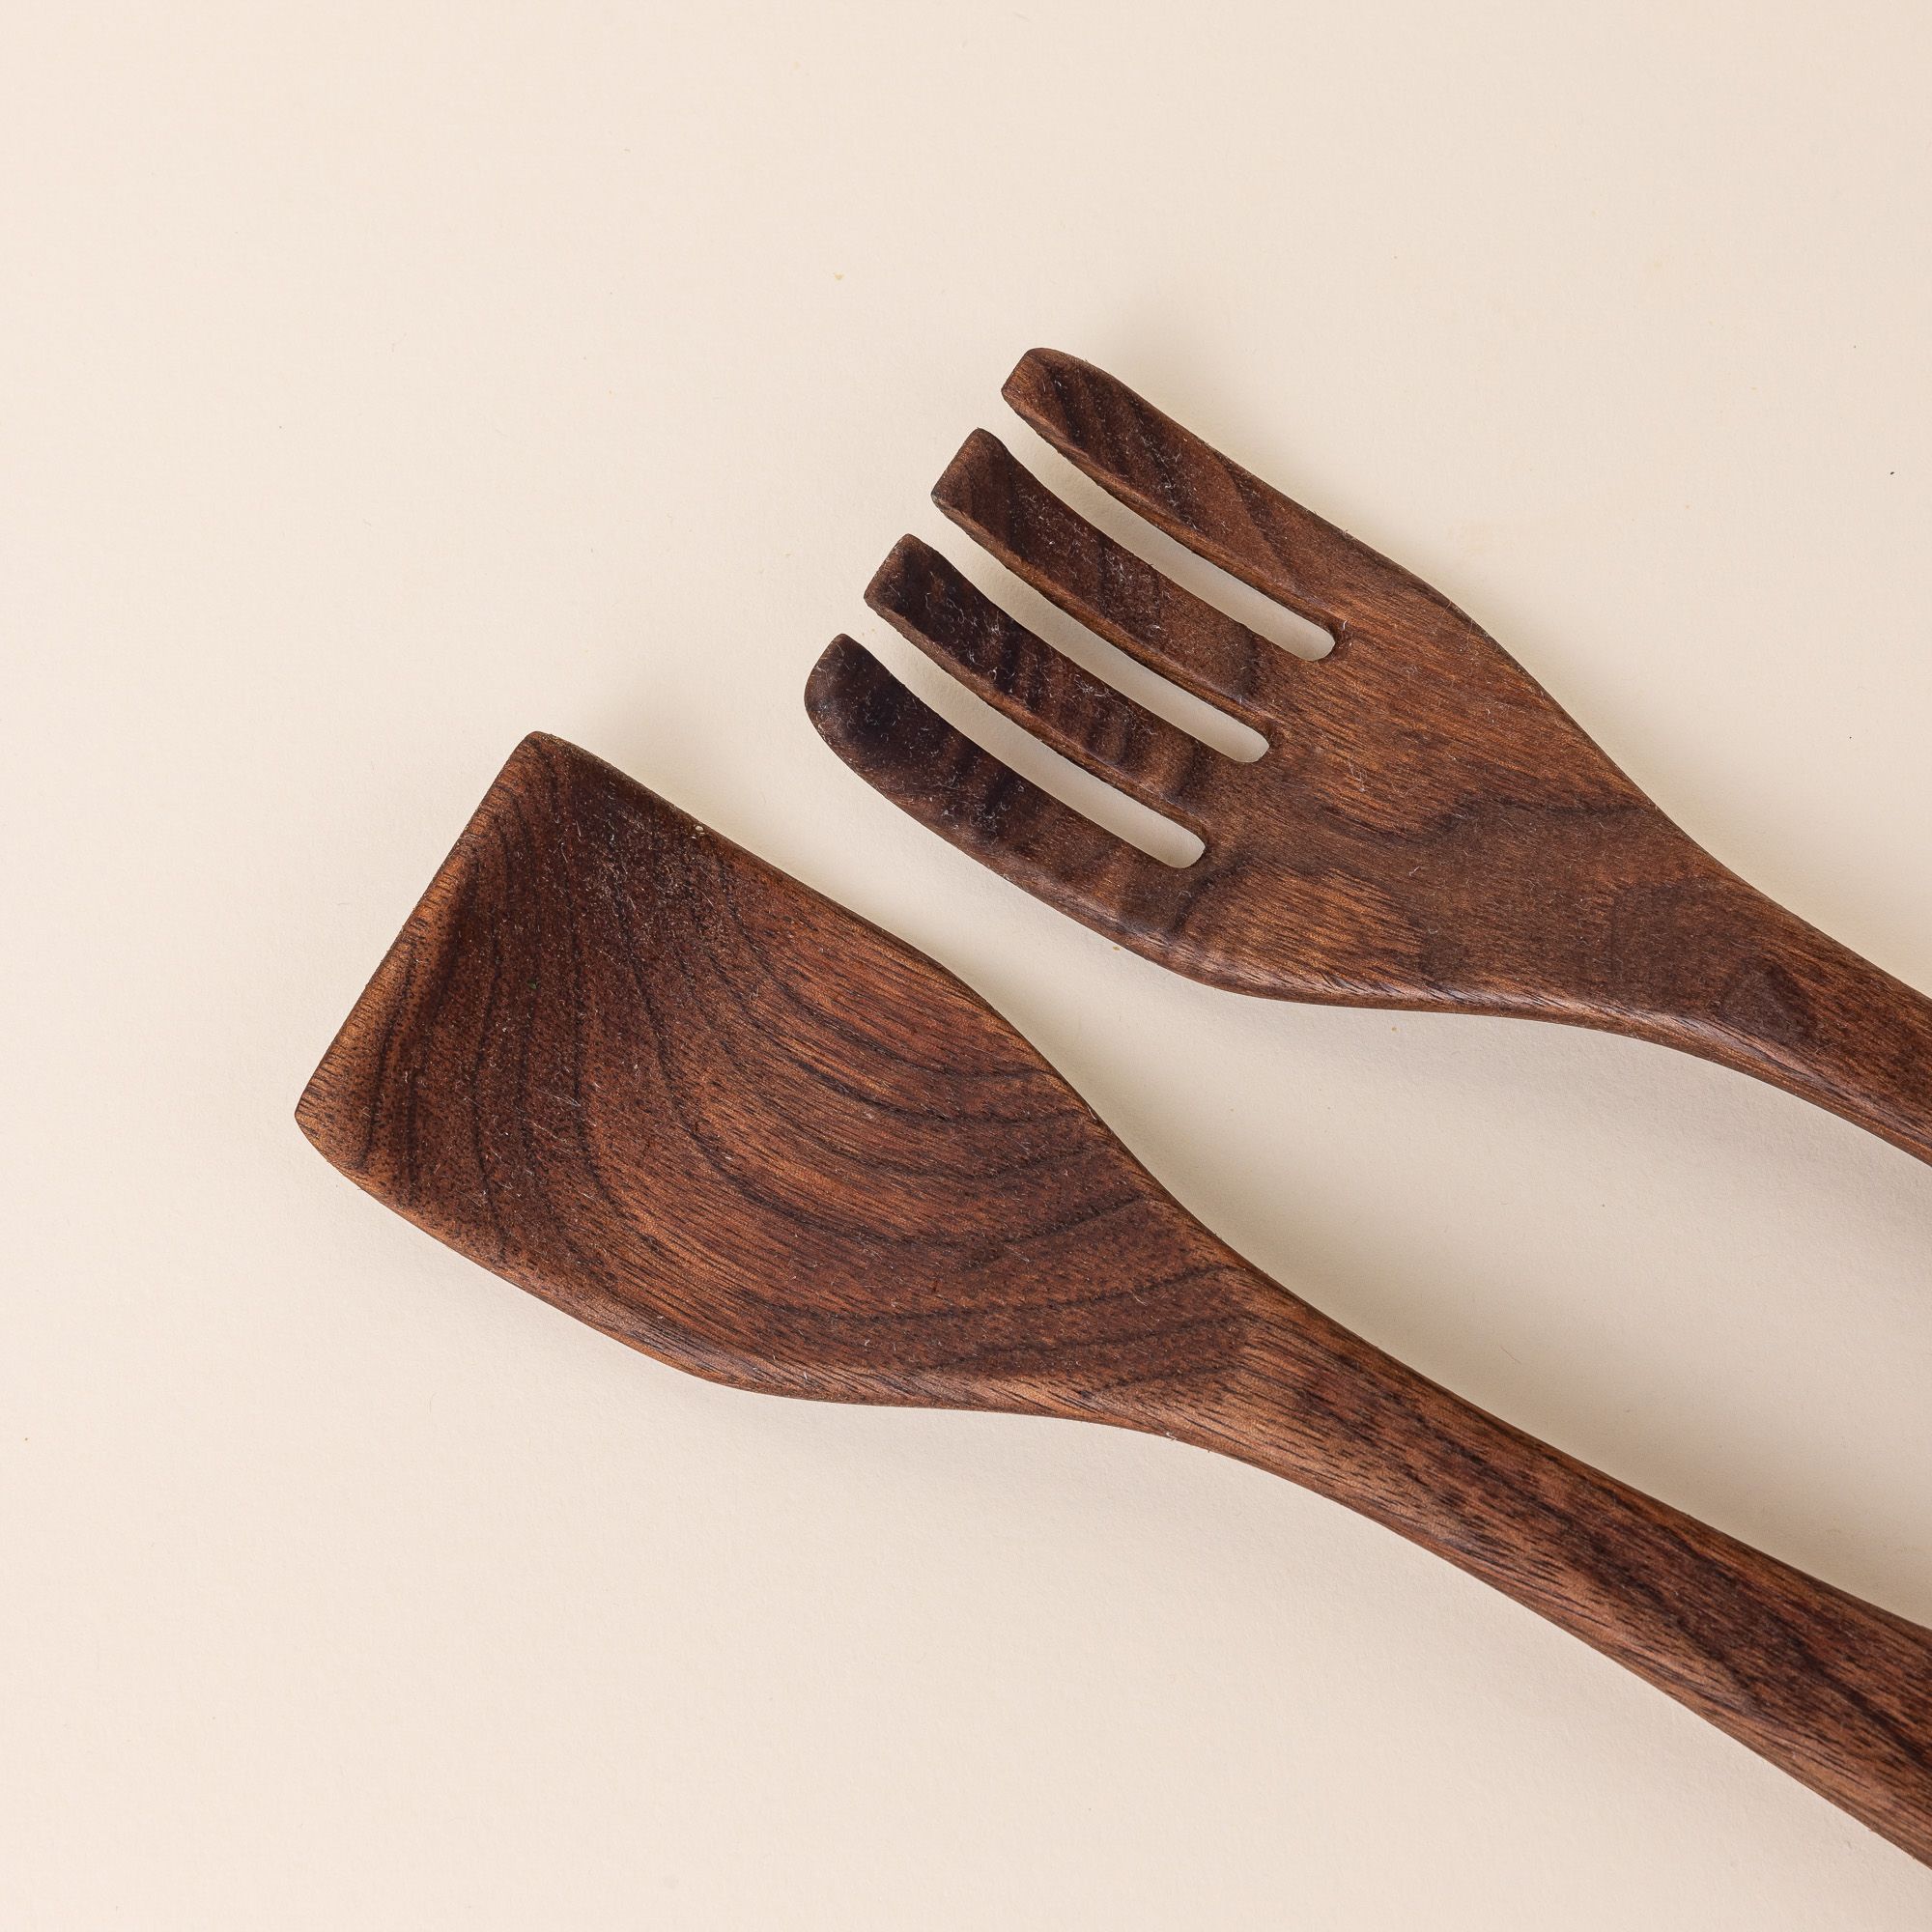 Closer look at the end of two long walnut wood serving utensils. The left utensil has a shape like a spatula, the right has a shape like a fork.